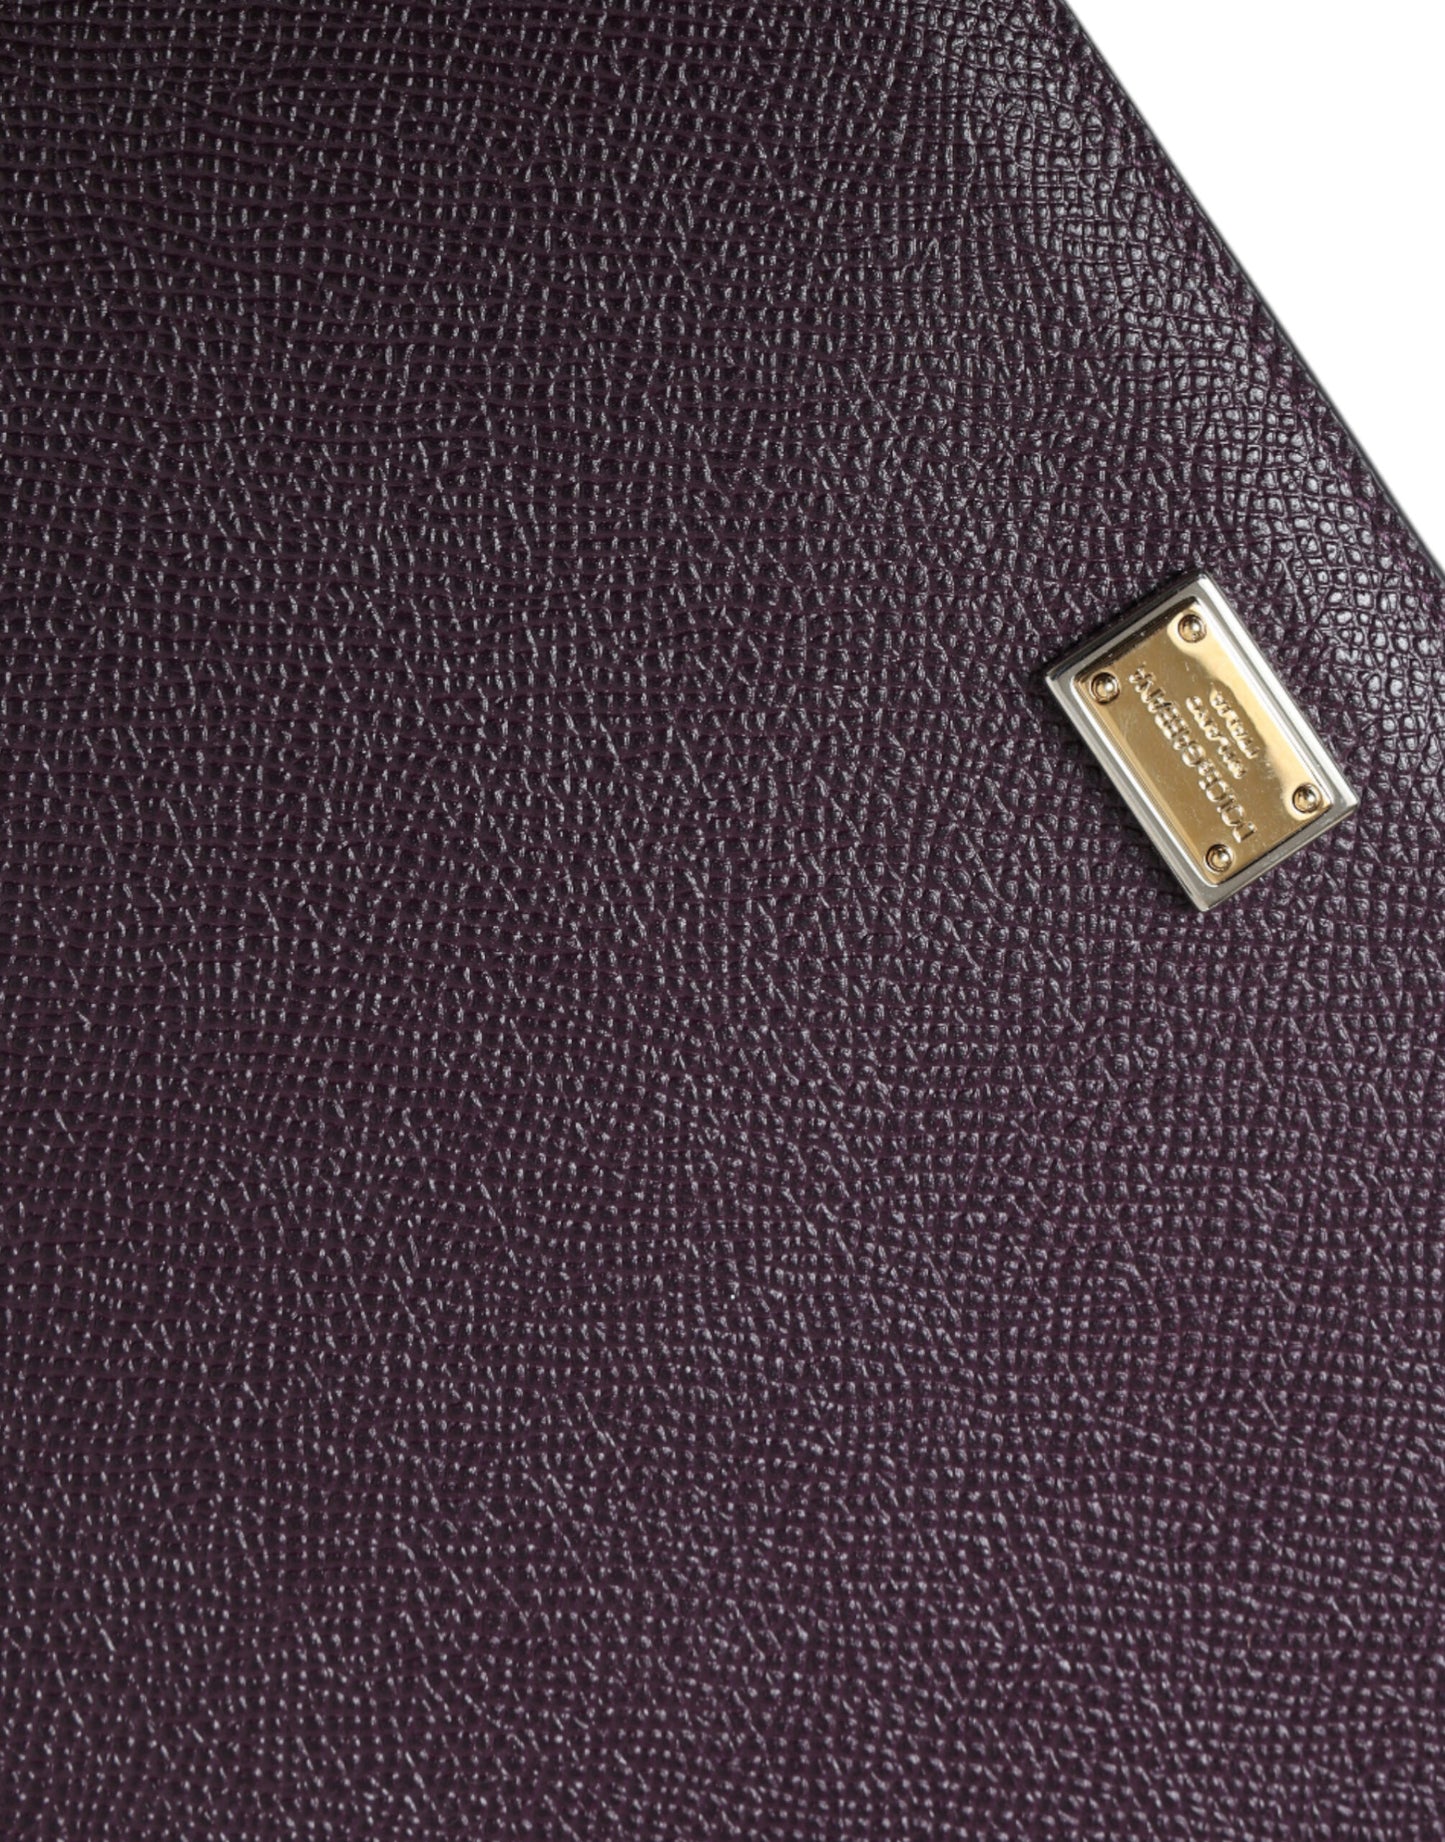 Elegant Leather Tablet Pouch in Rich Brown